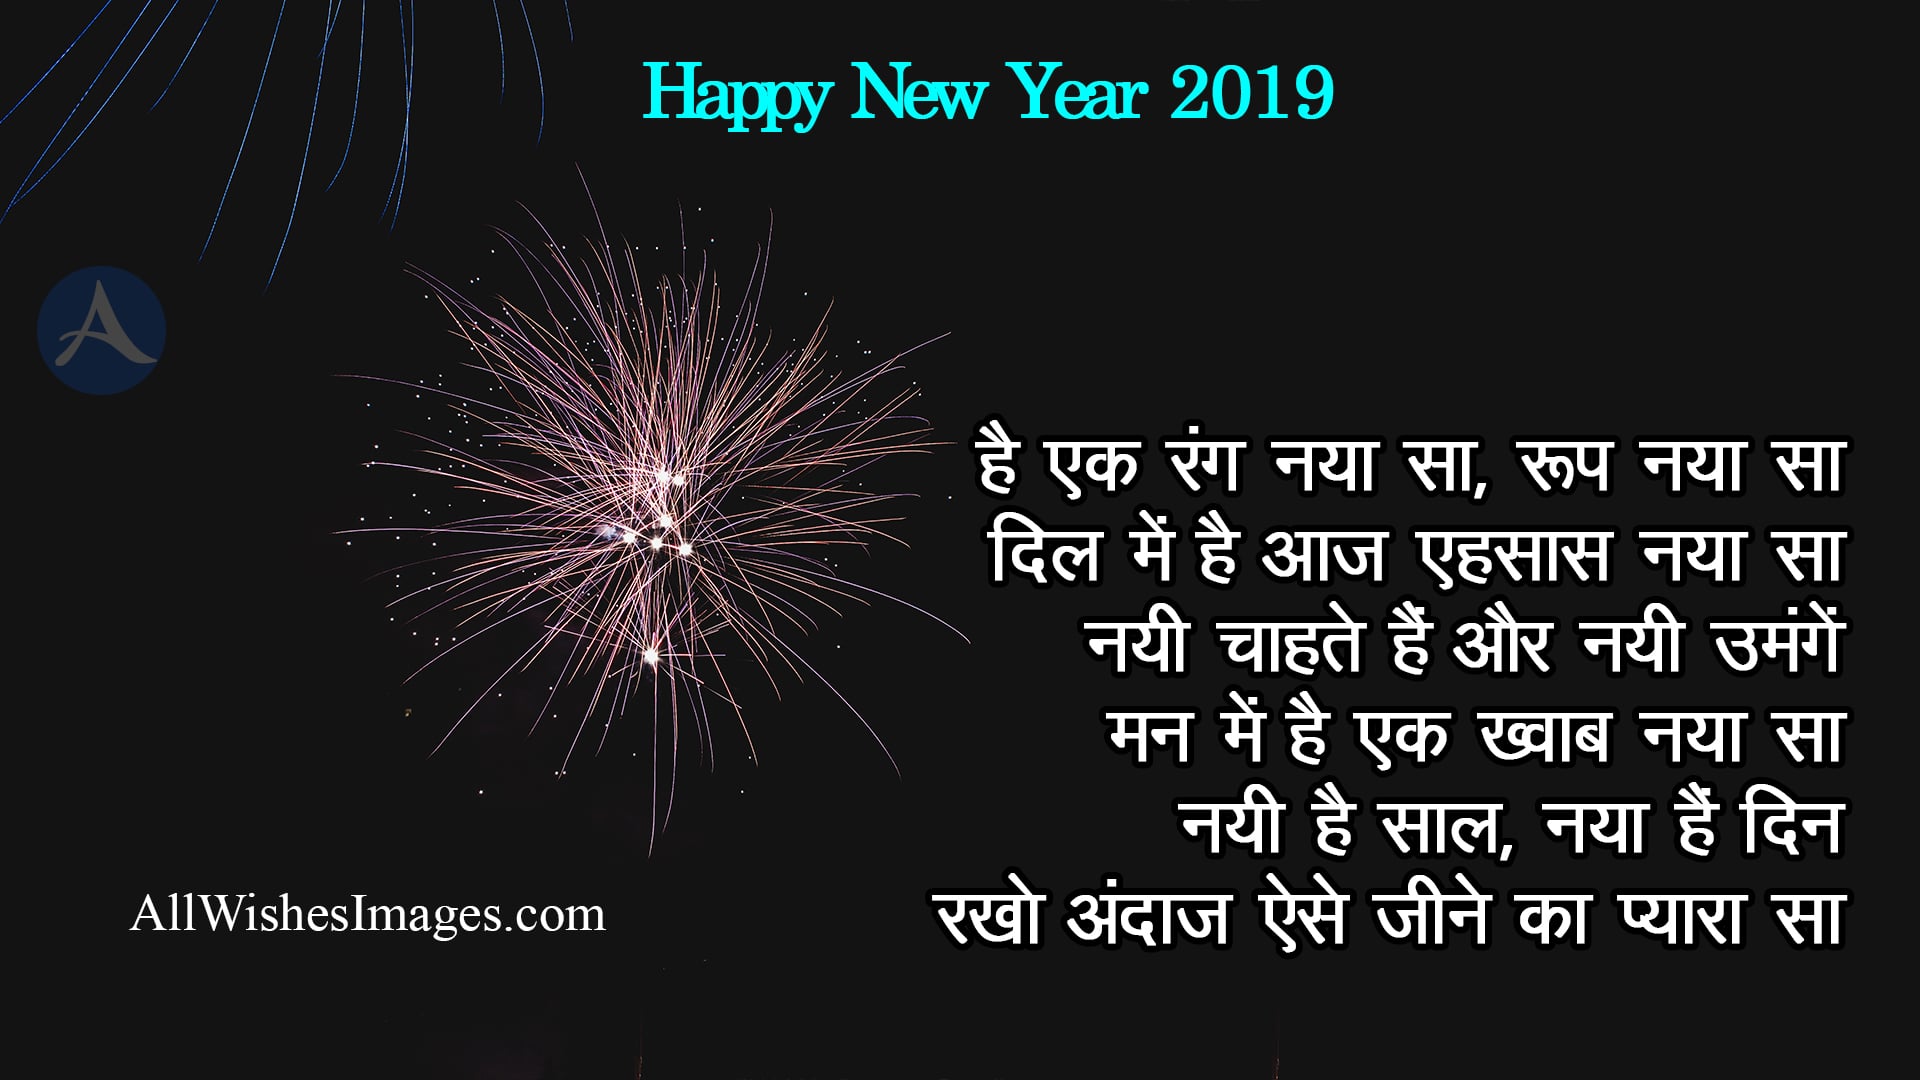 Happy New Year Shayari Photo - All Wishes Images - Images for WhatsApp